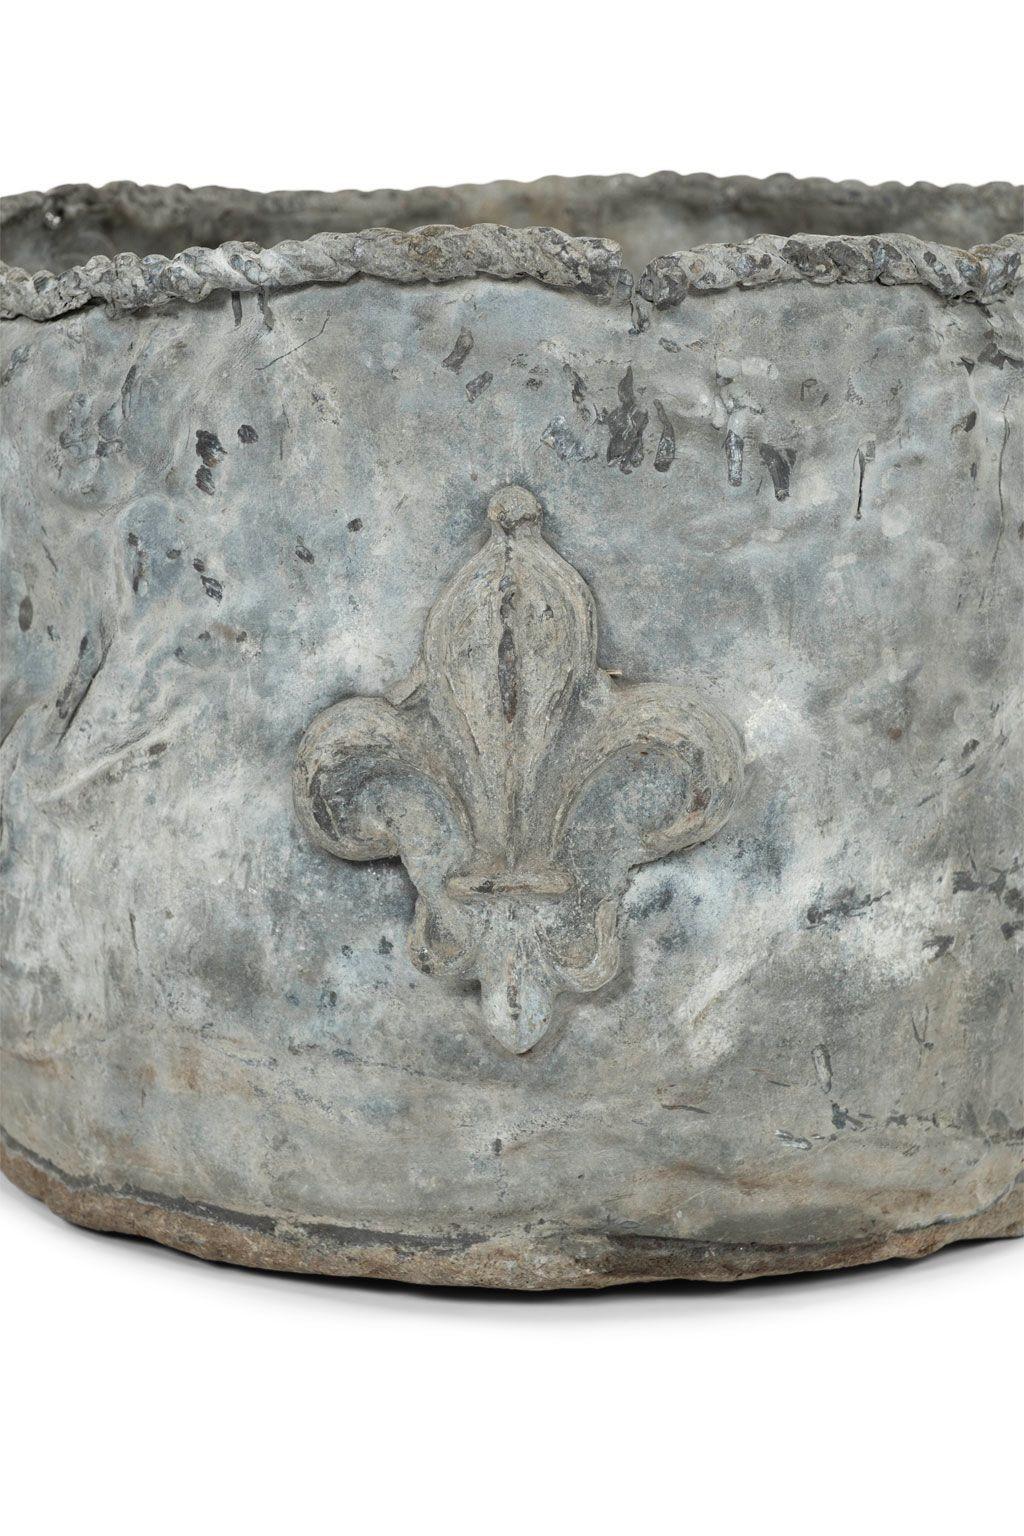 English Georgian Lead Planter in neoclassical style circa 1780-1799. Round shape with Fleur d'Lis decoration around sides. Priced $2400.
Second square Georgian planter available (see images), and sold individually.